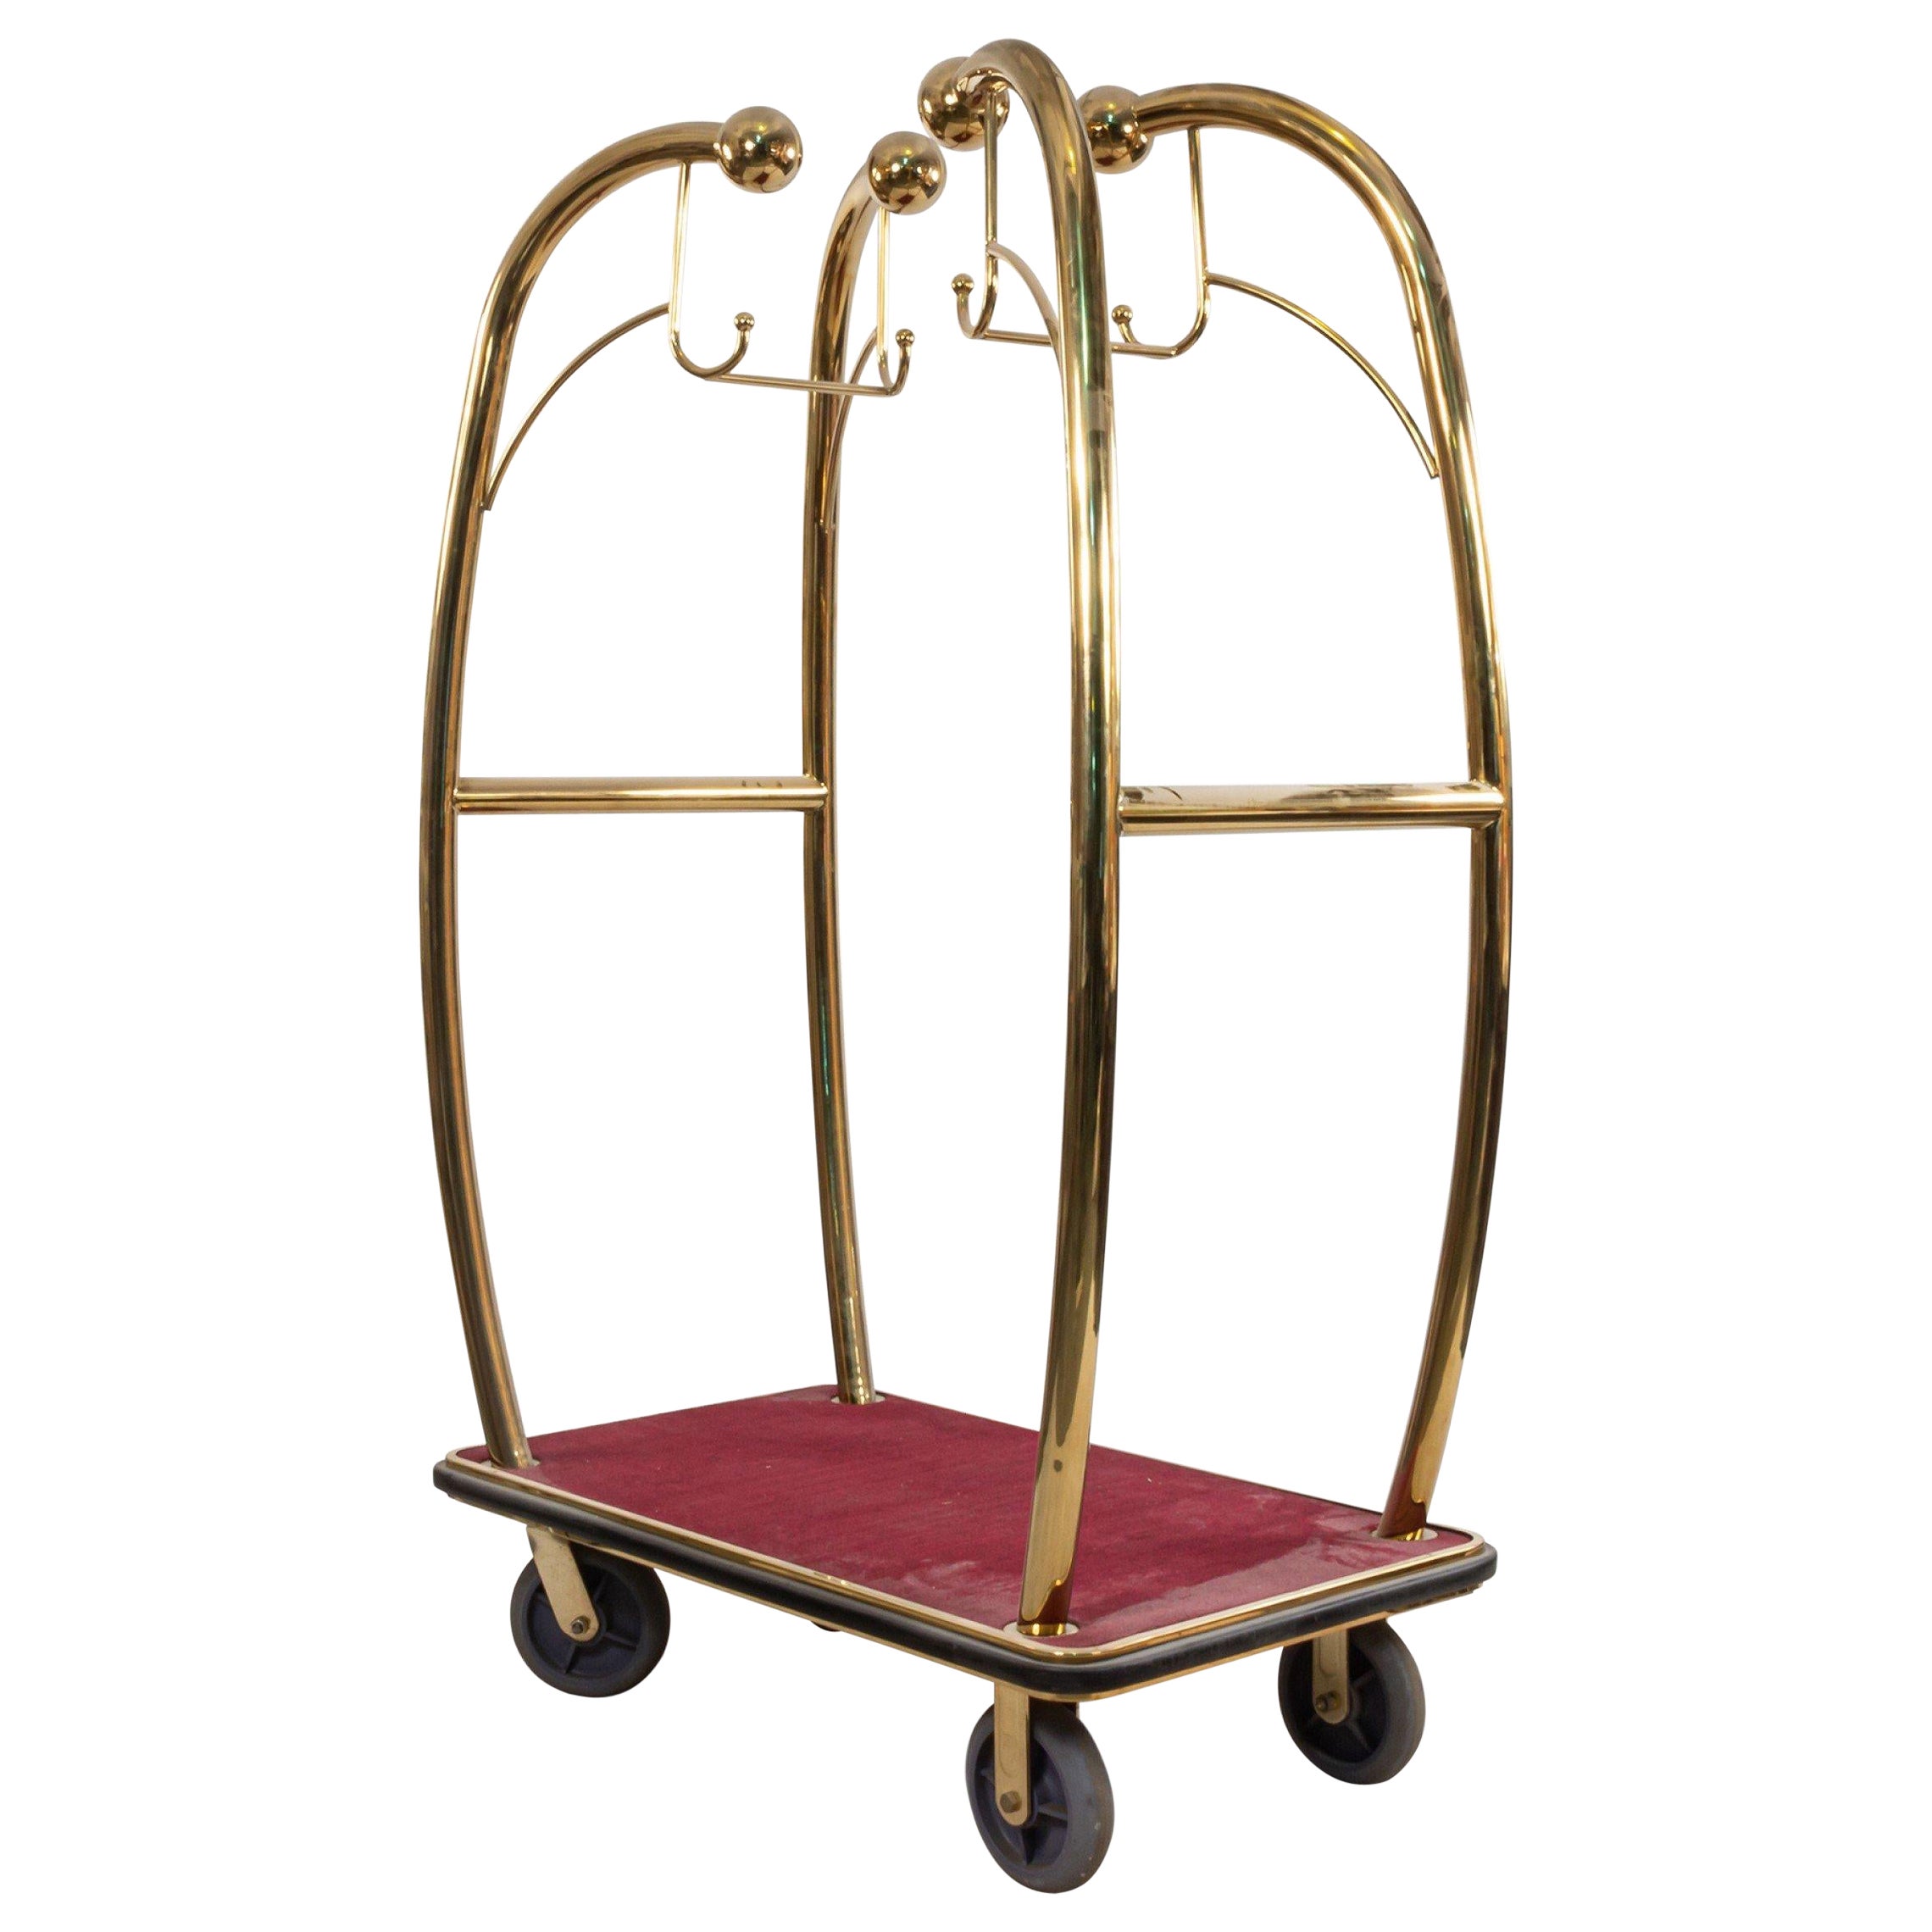 Brass and Red Carpet Hotel Luggage Carts